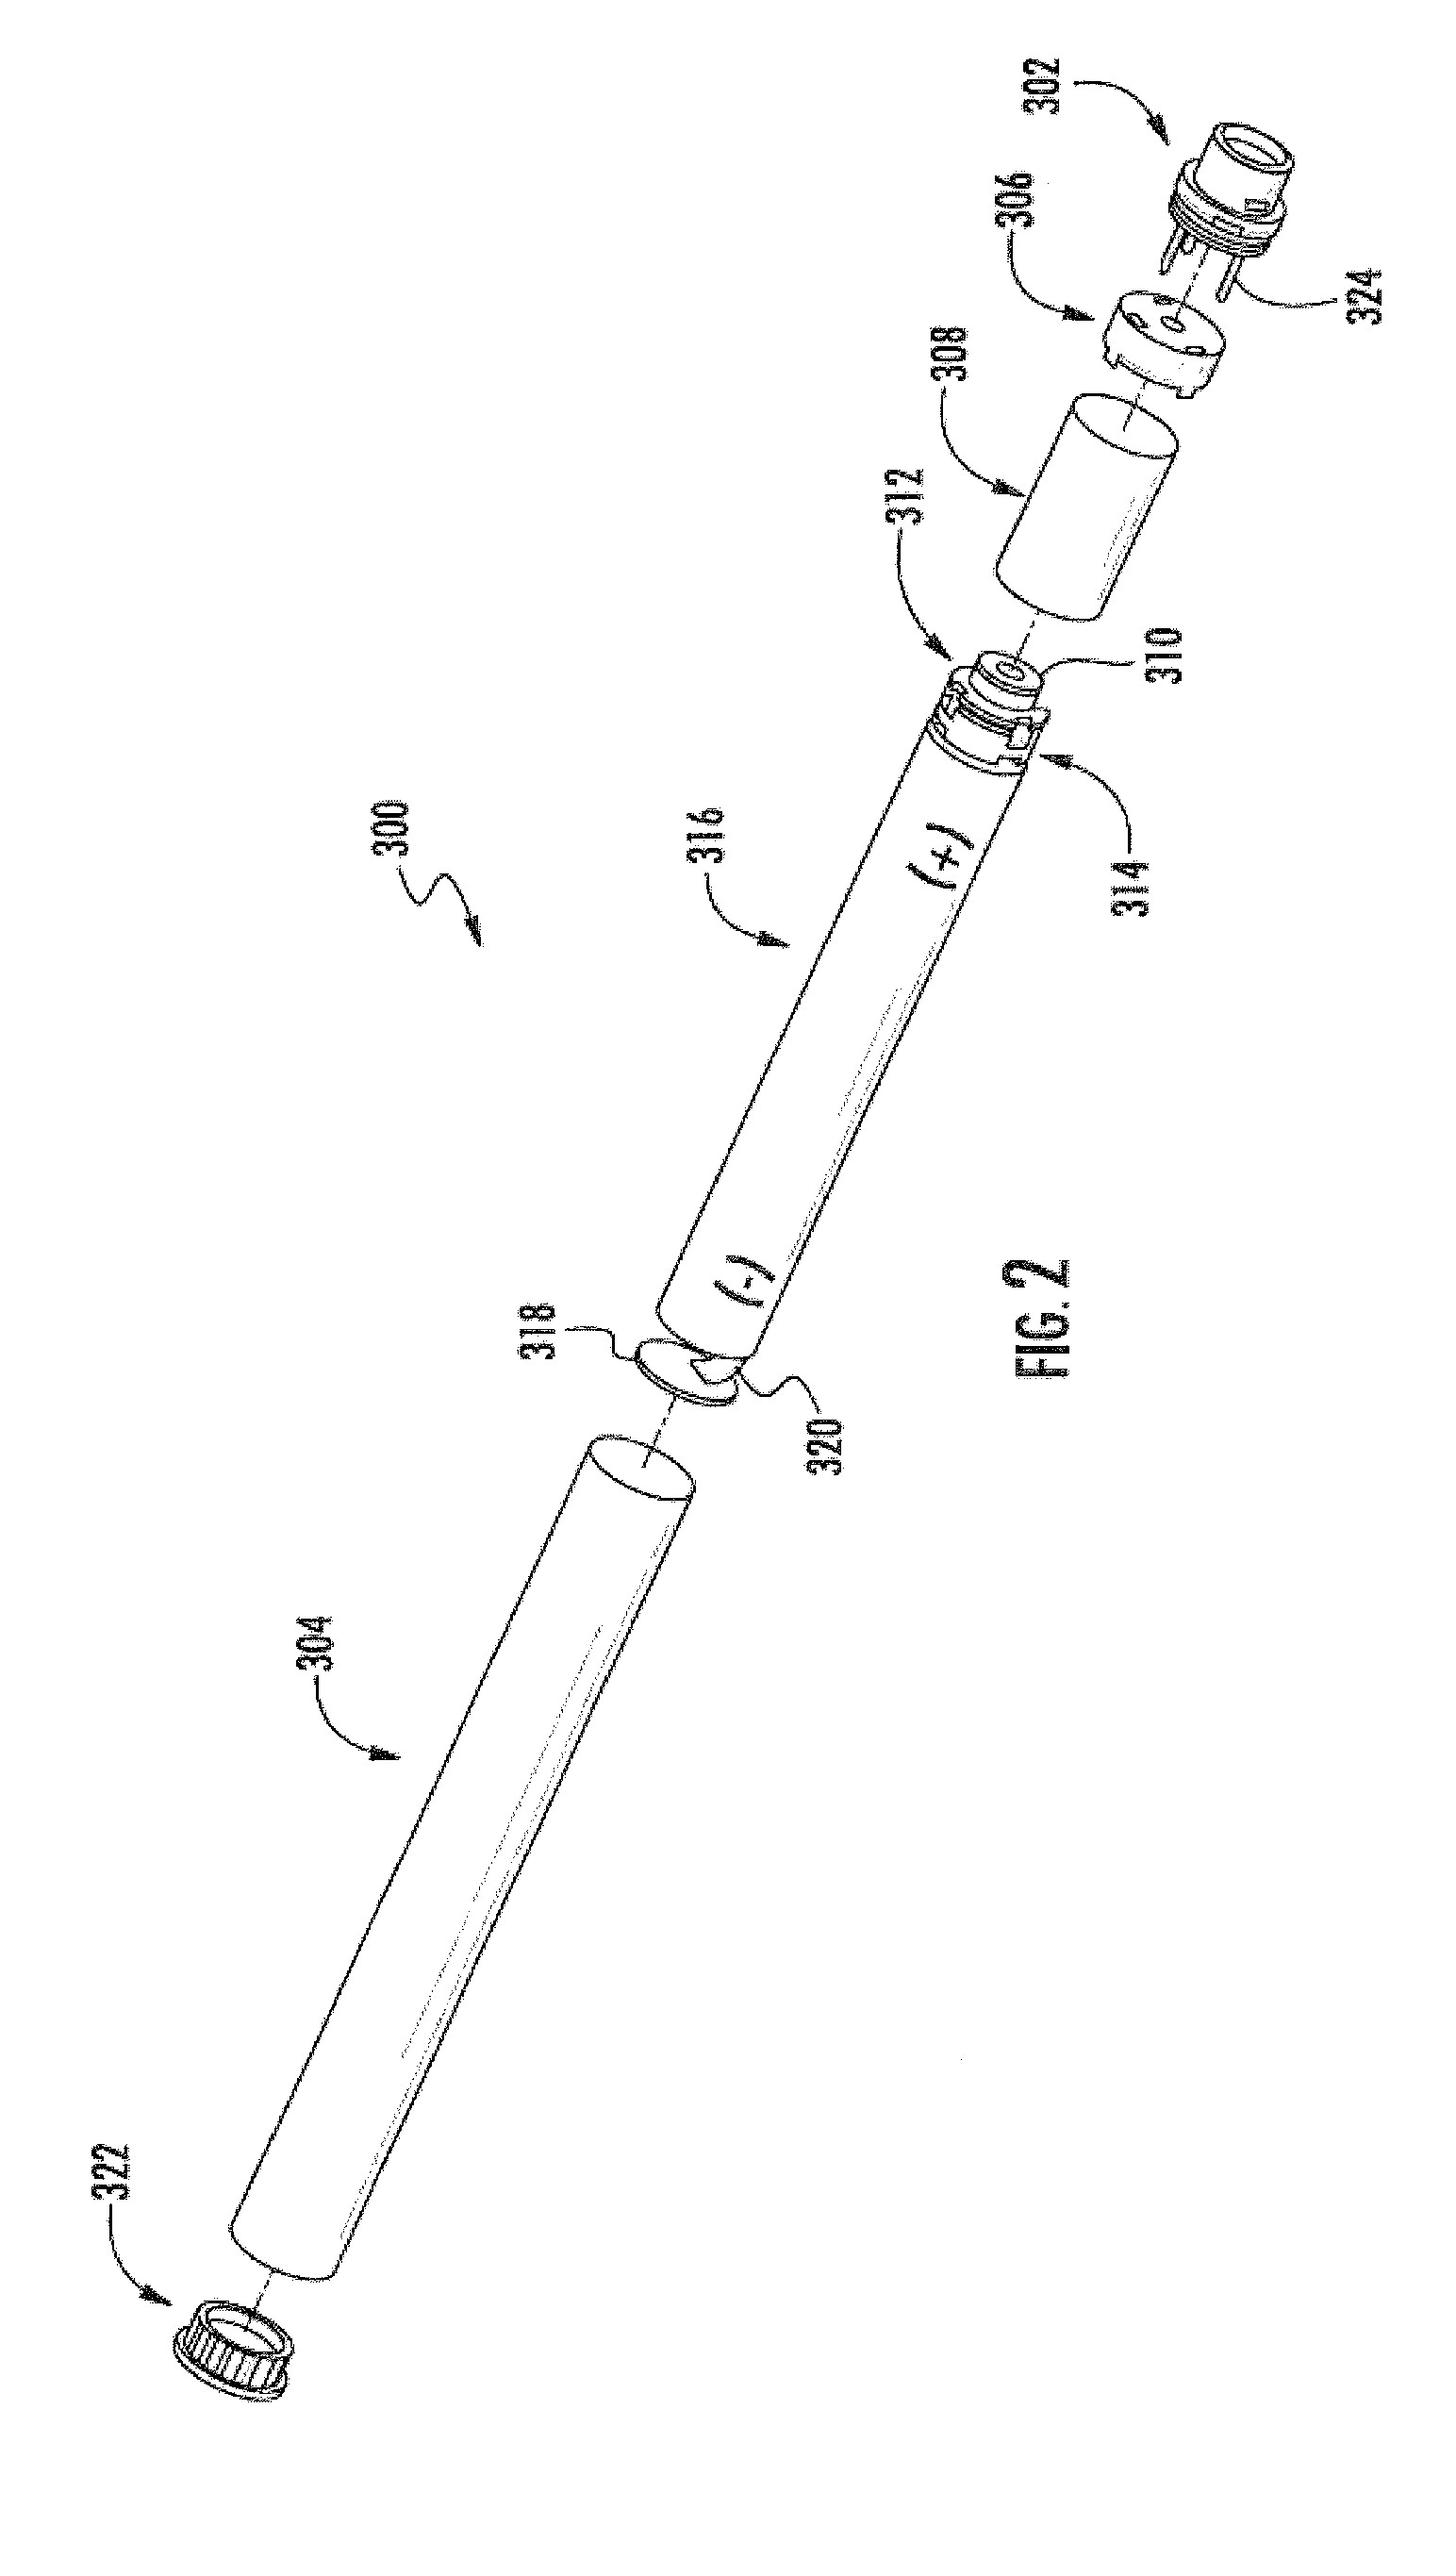 Electrically-powered aerosol delivery system